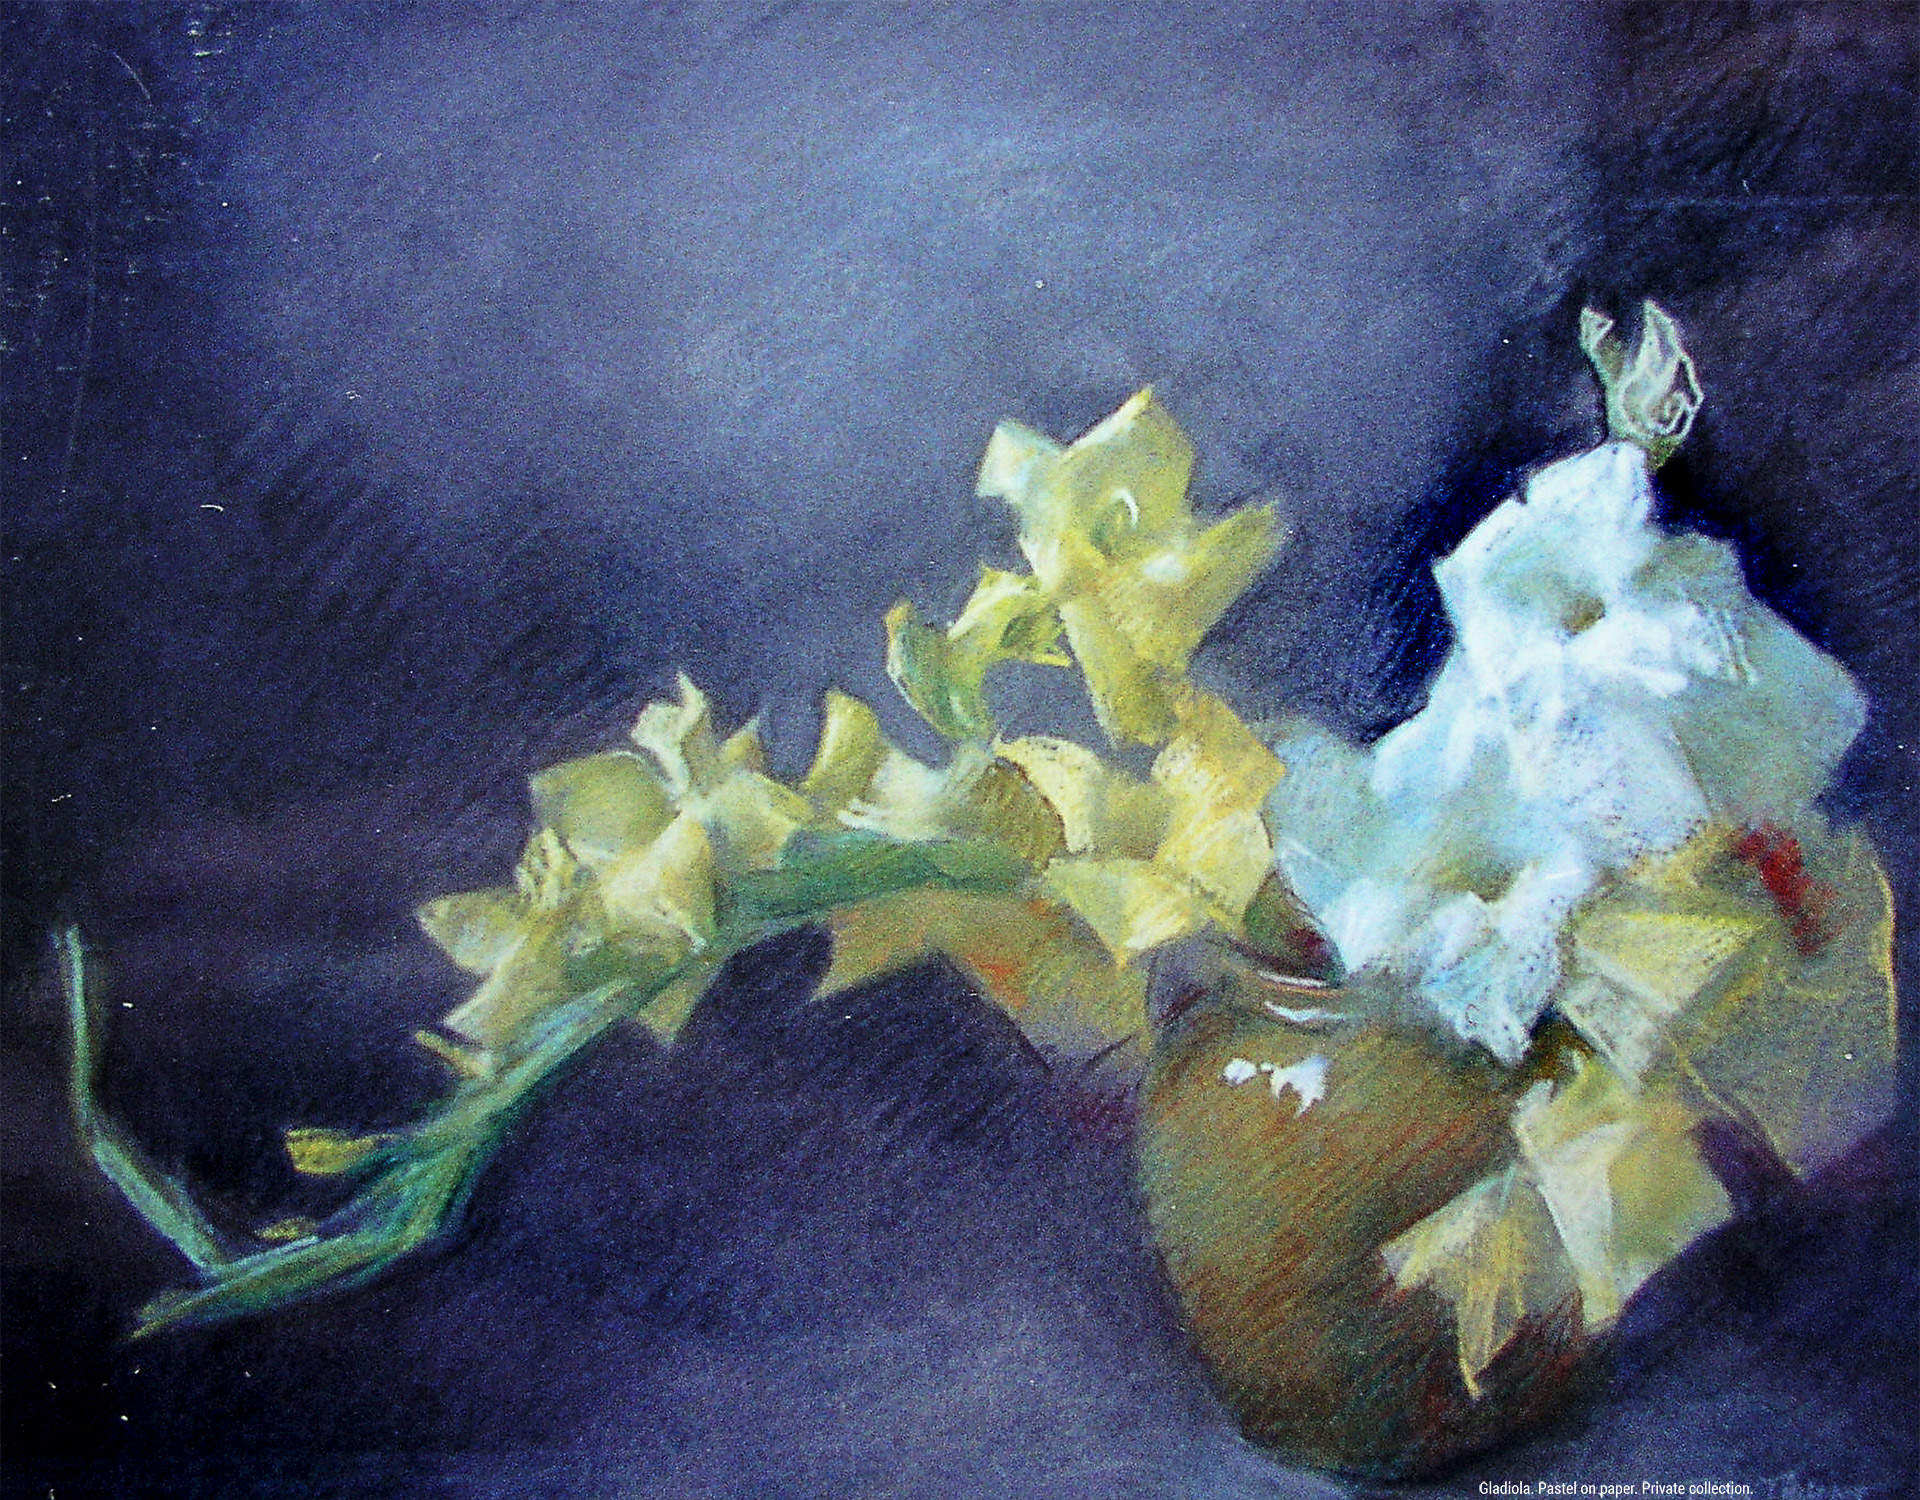 Gladiola. Pastel on paper. Private collection.